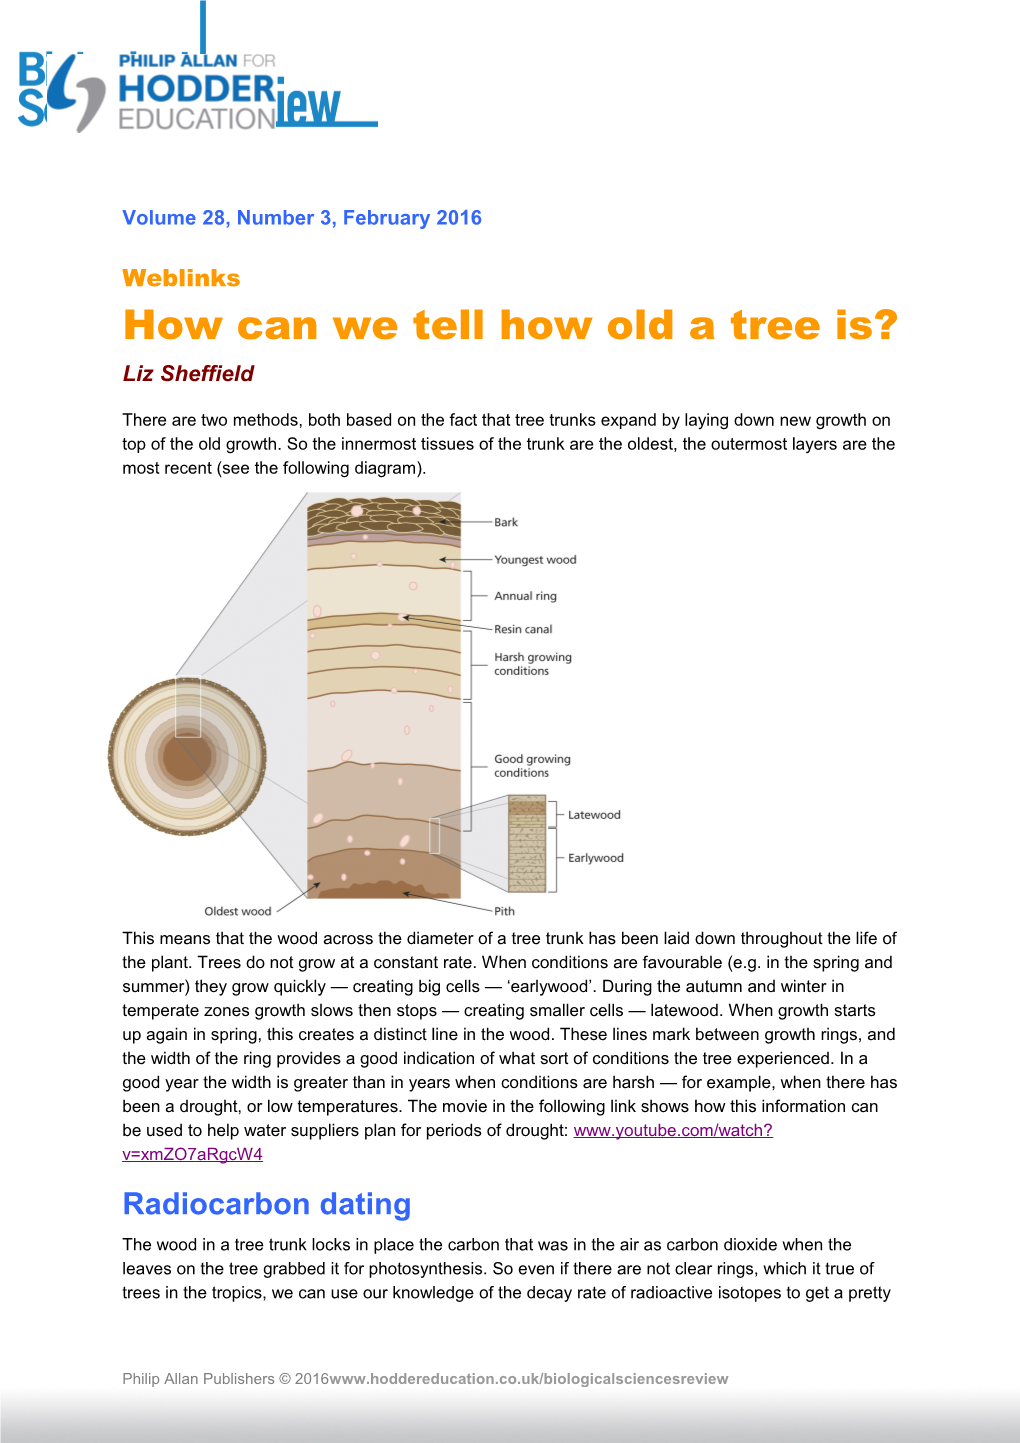 How Can We Tell How Old a Tree Is?